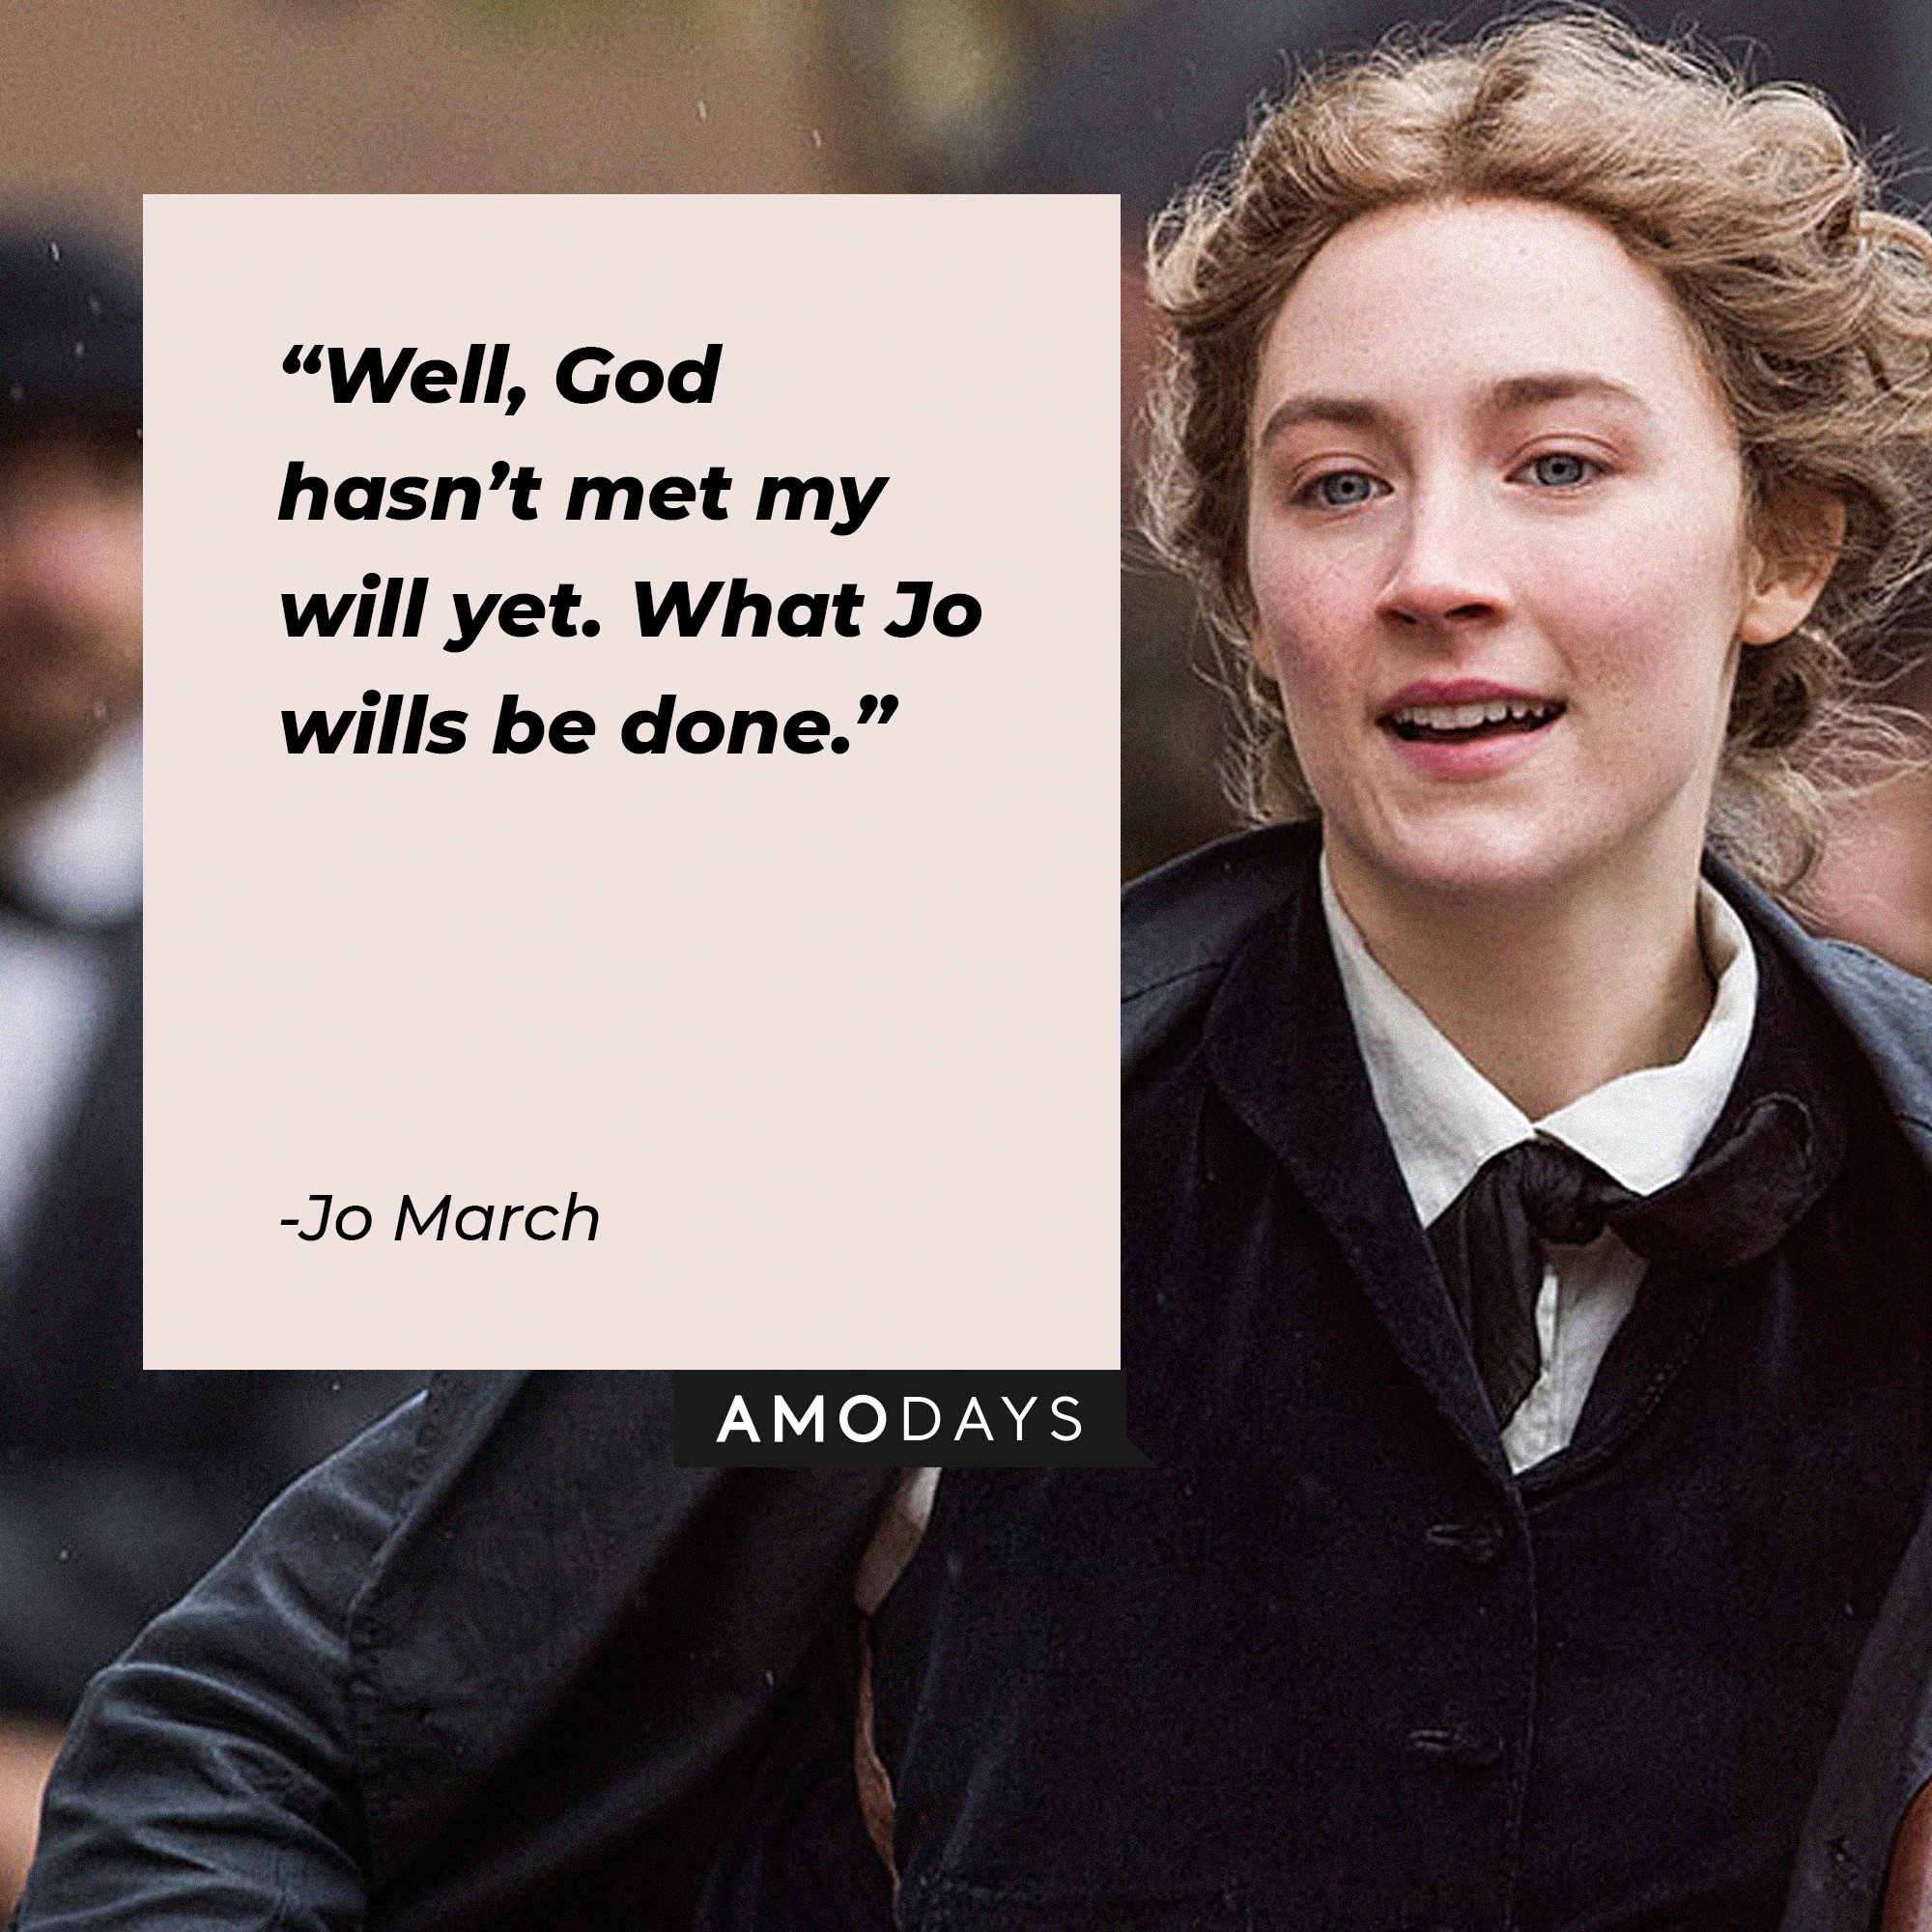 Jo March’s quote: “Well, God hasn’t met my will yet. What Jo wills be done.” | Image: AmoDays